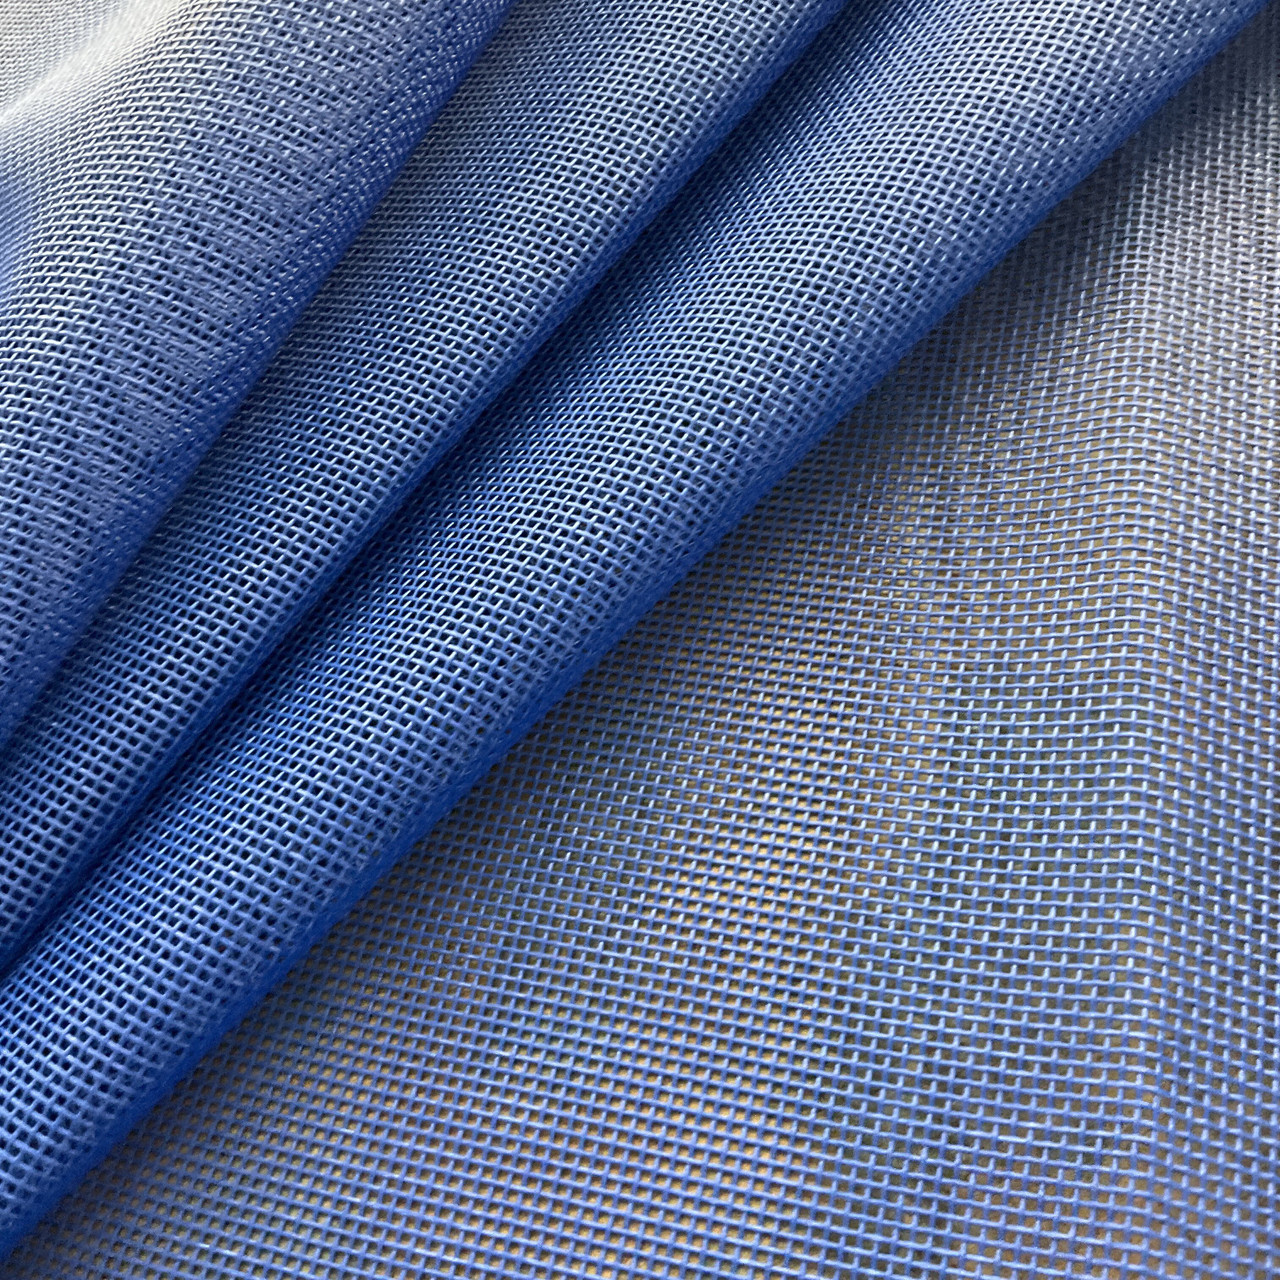 Mesh Fabric By The Yard Fabric Wholesale Direct, Mesh Fabric For Sewing 